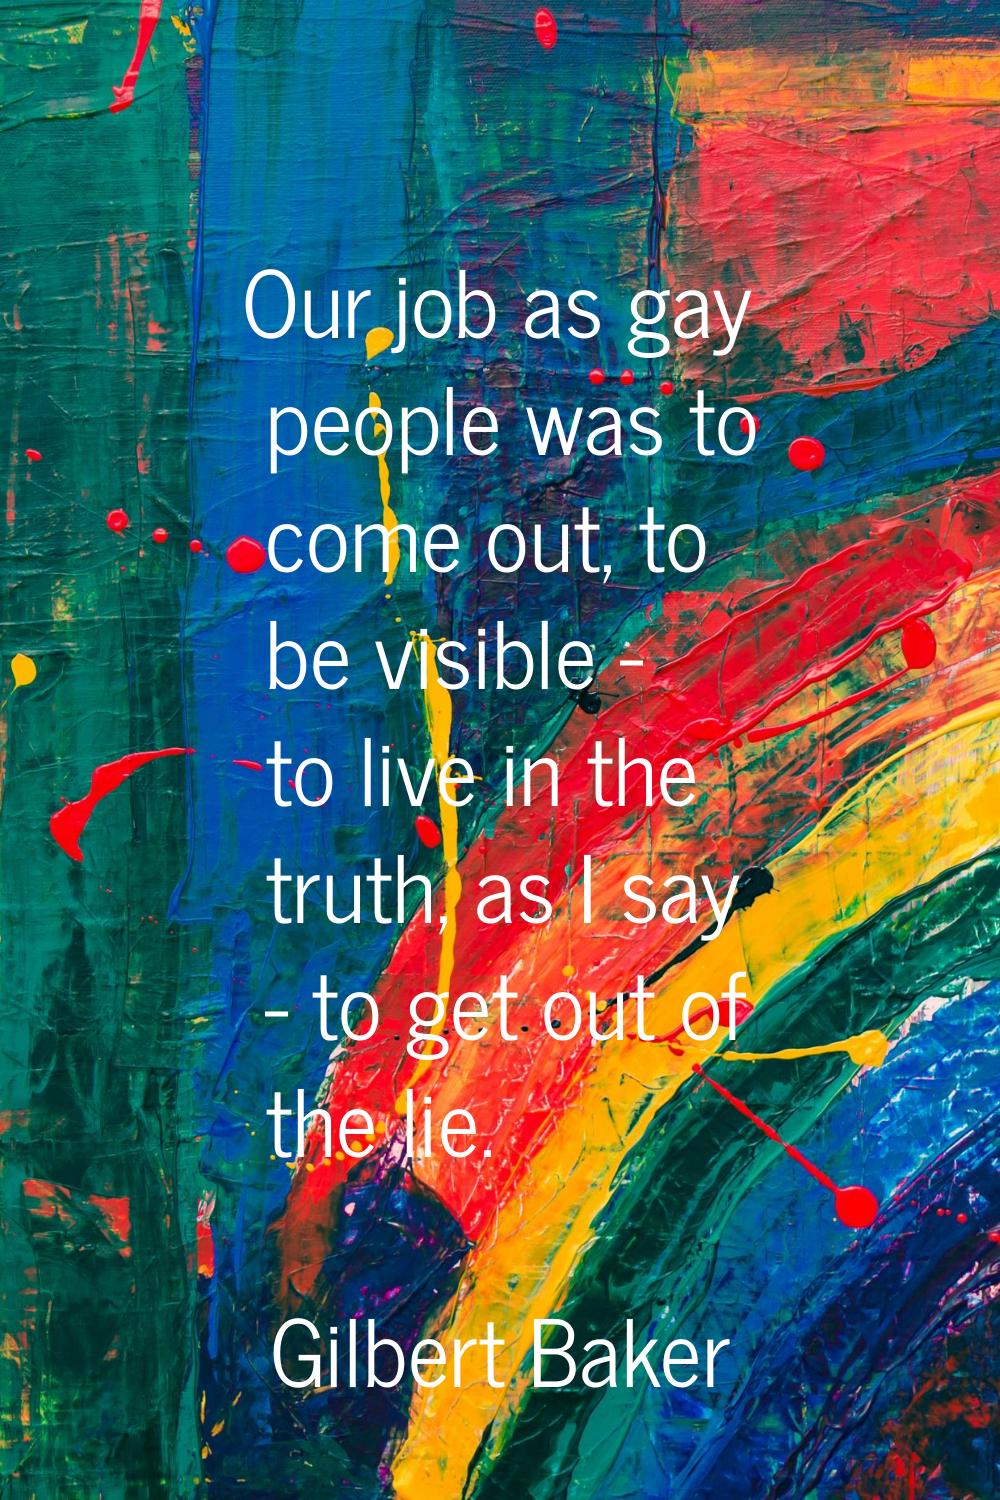 Our job as gay people was to come out, to be visible - to live in the truth, as I say - to get out 